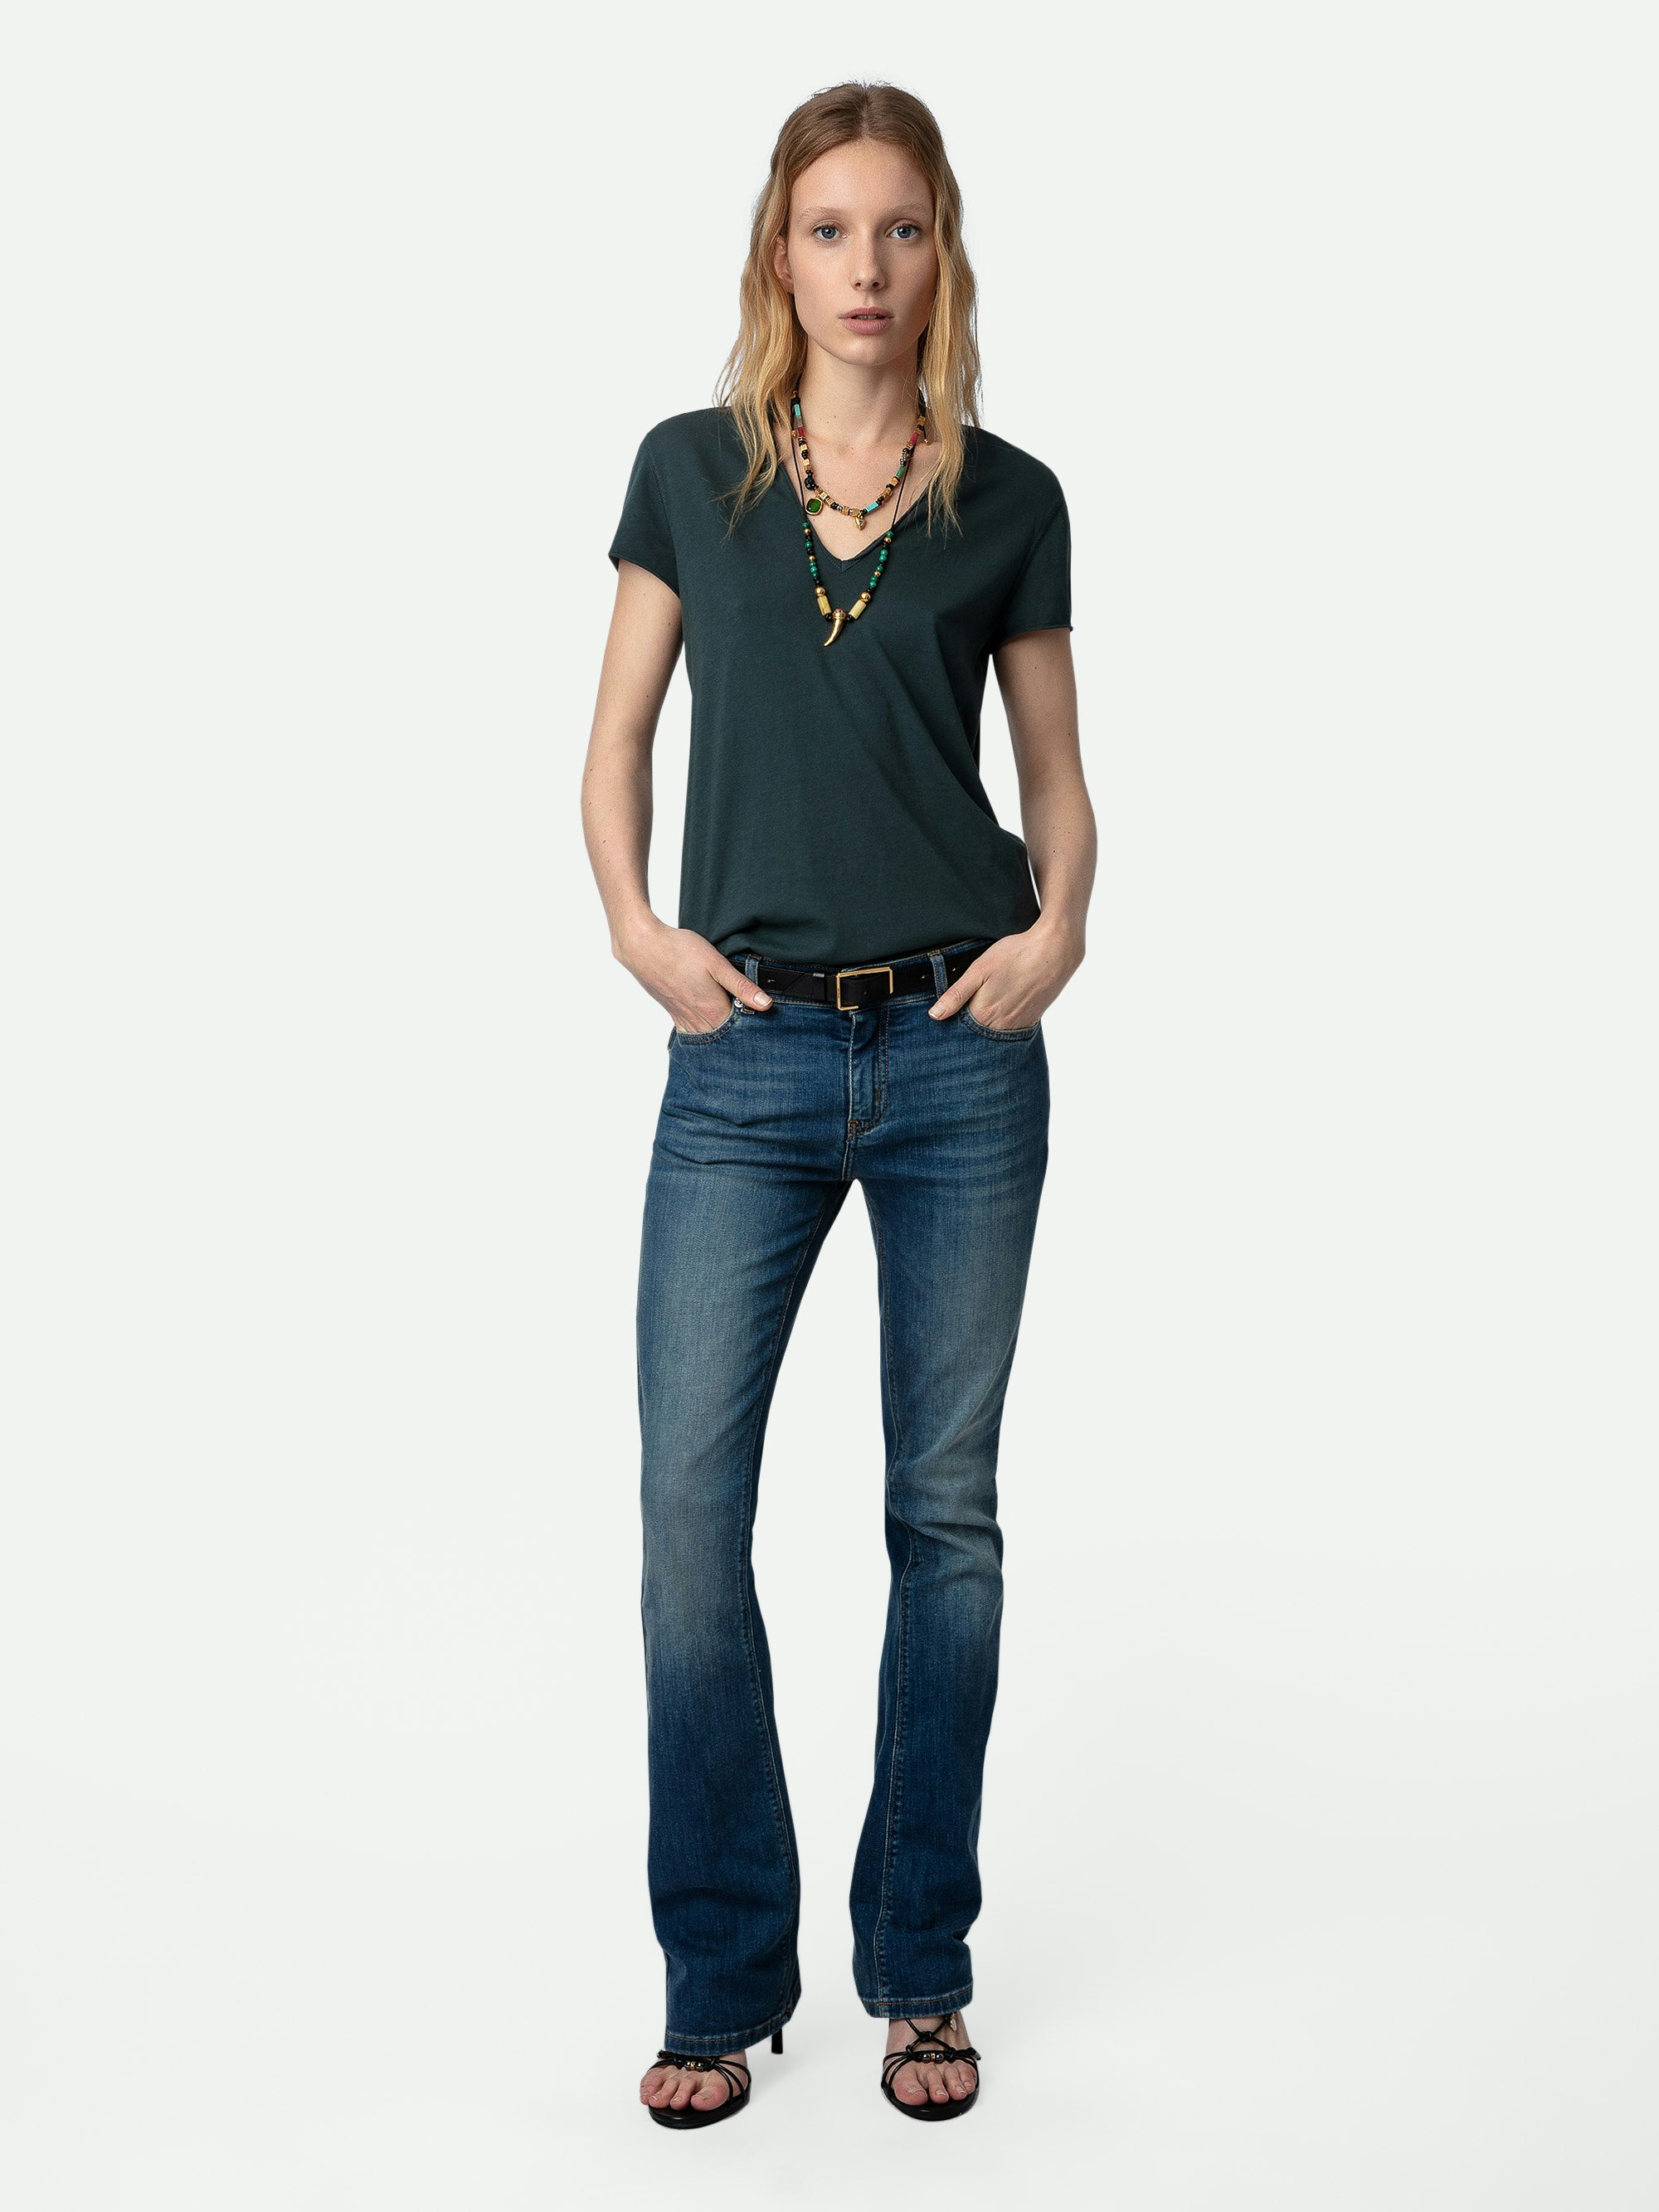 Women's luxury and trendy t-shirts and henley tops | Zadig&Voltaire